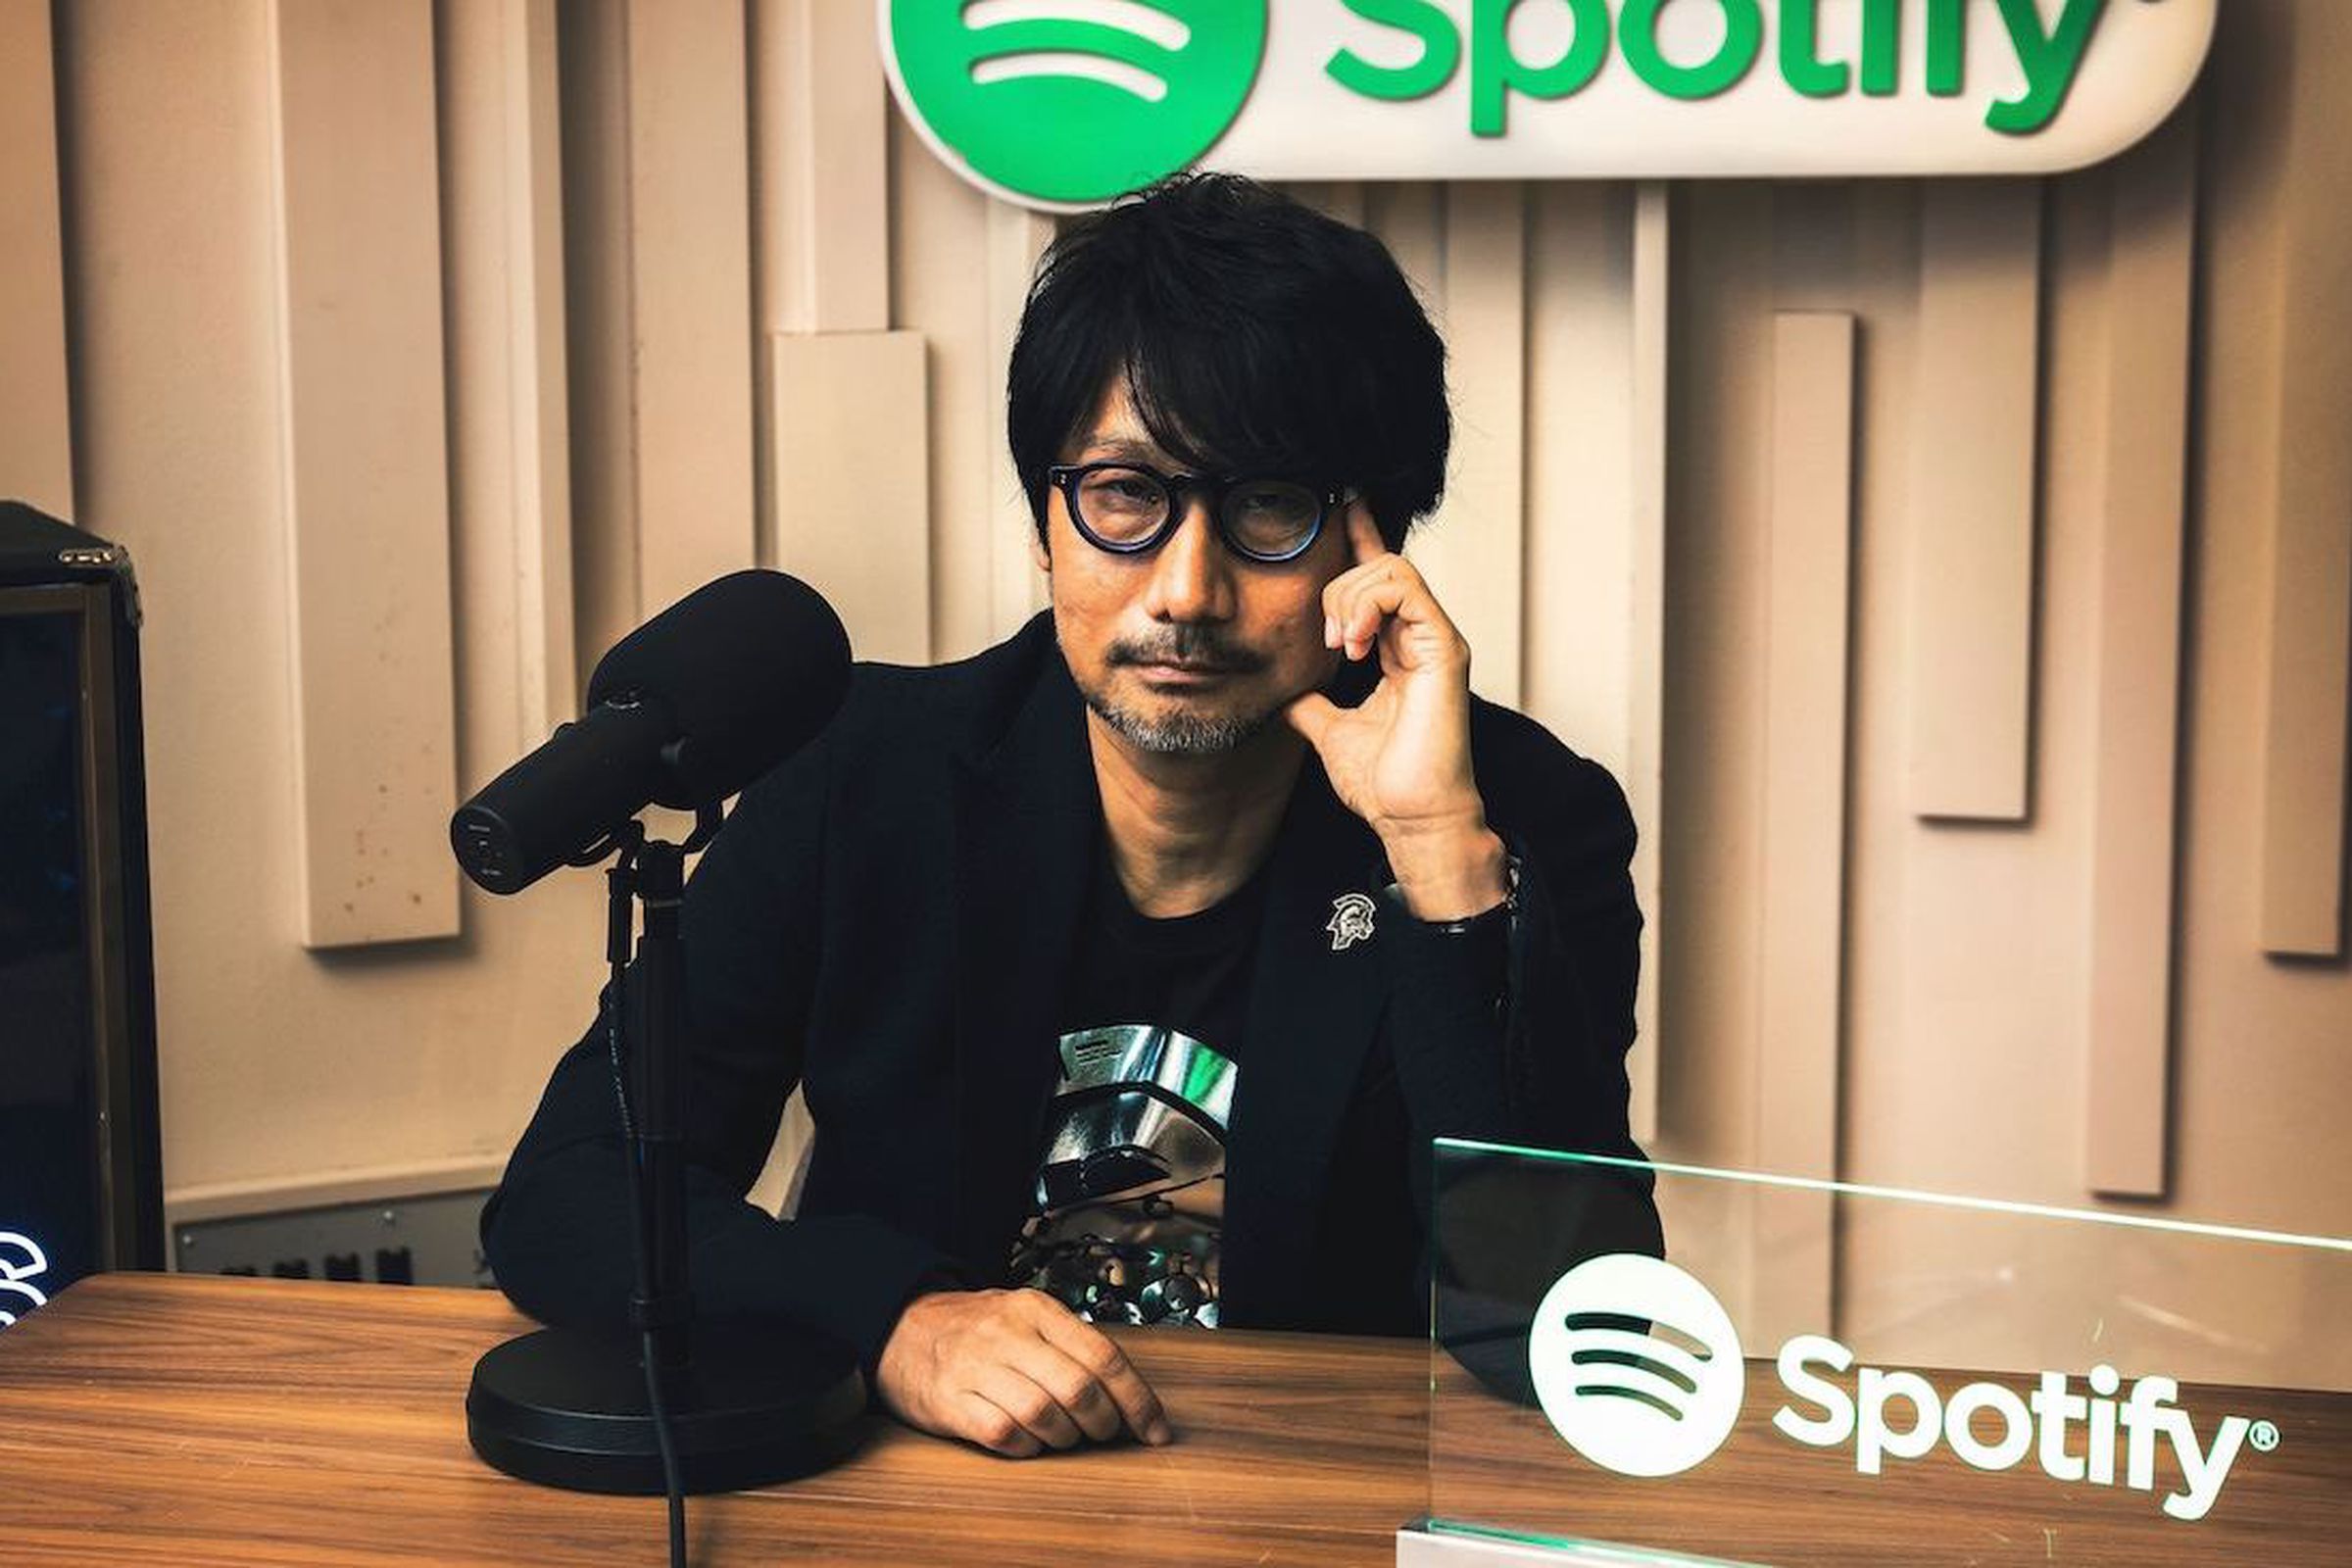 Hideo Kojima leaning thoughtfully at a desk with a microphone next to him with the Spotify logo hanging in the background